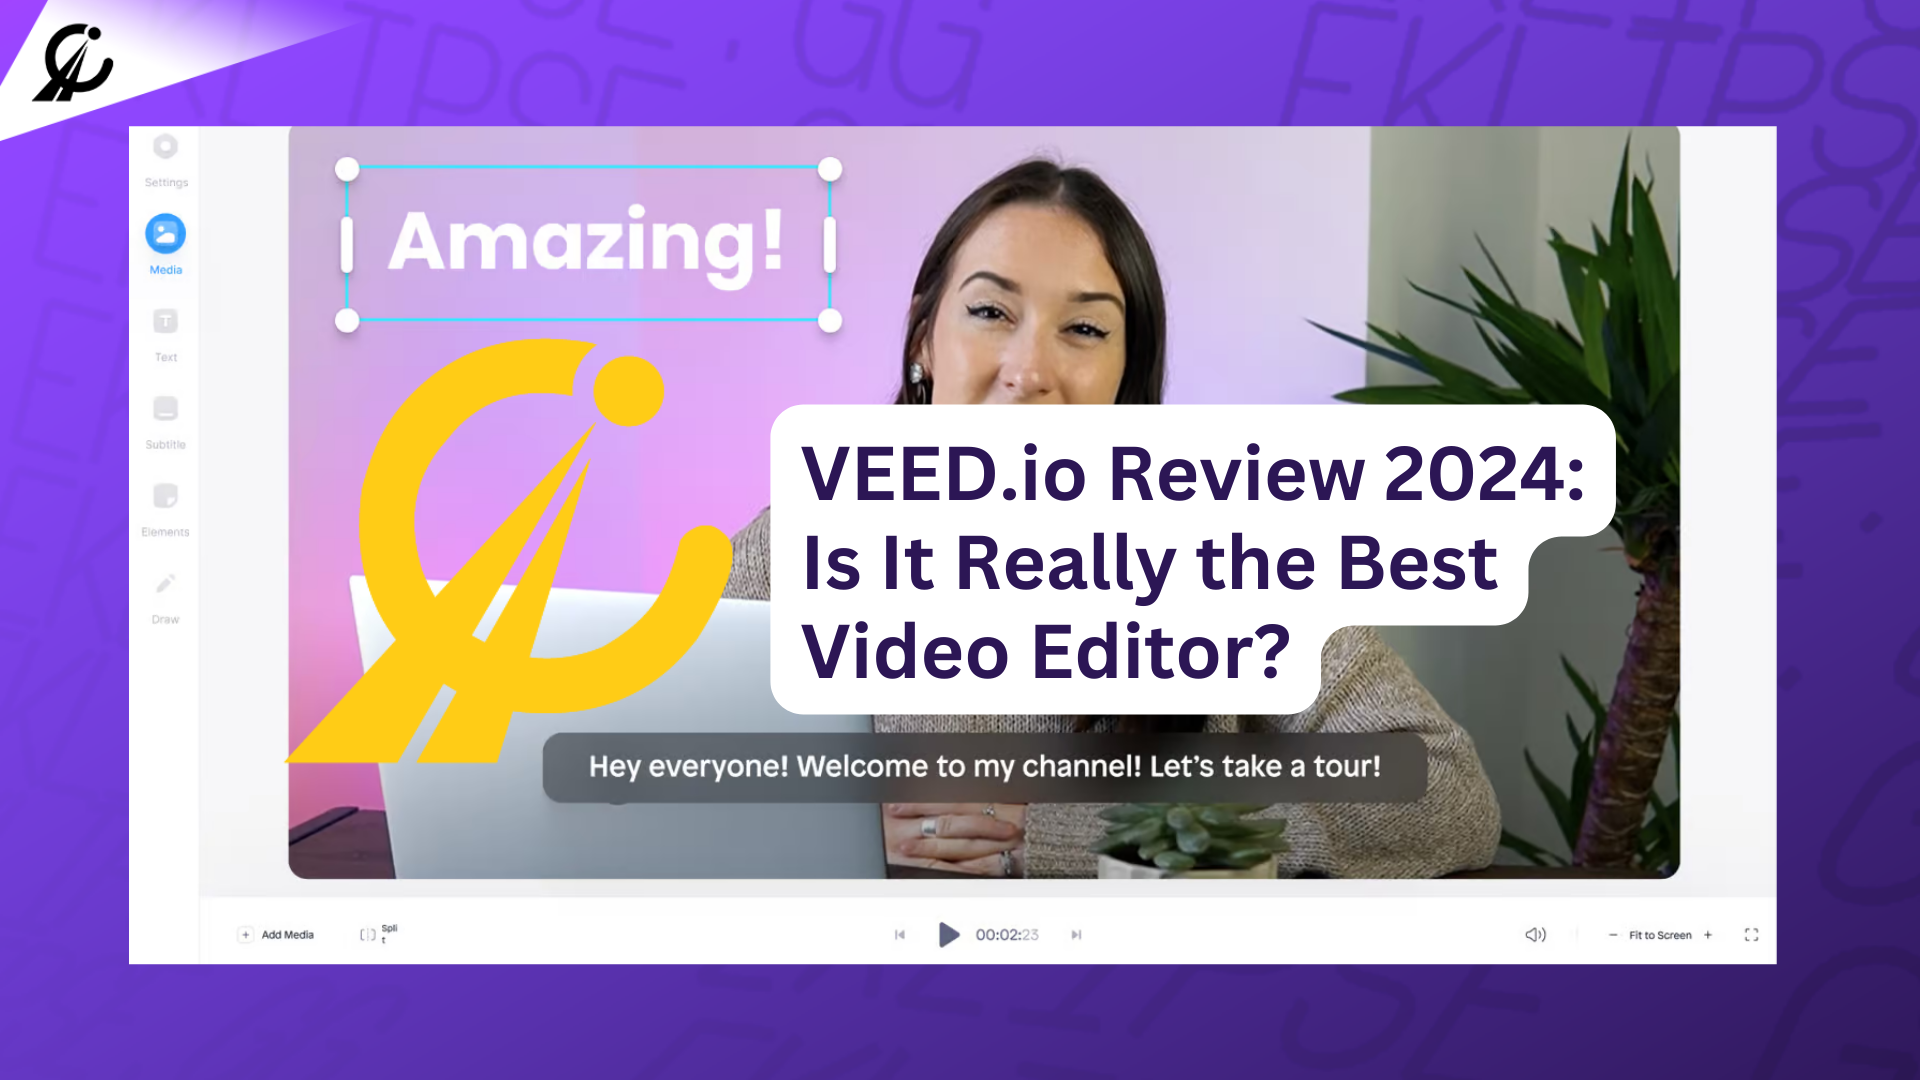 VEED.io Review 2024 Is It Really the Best Video Editor